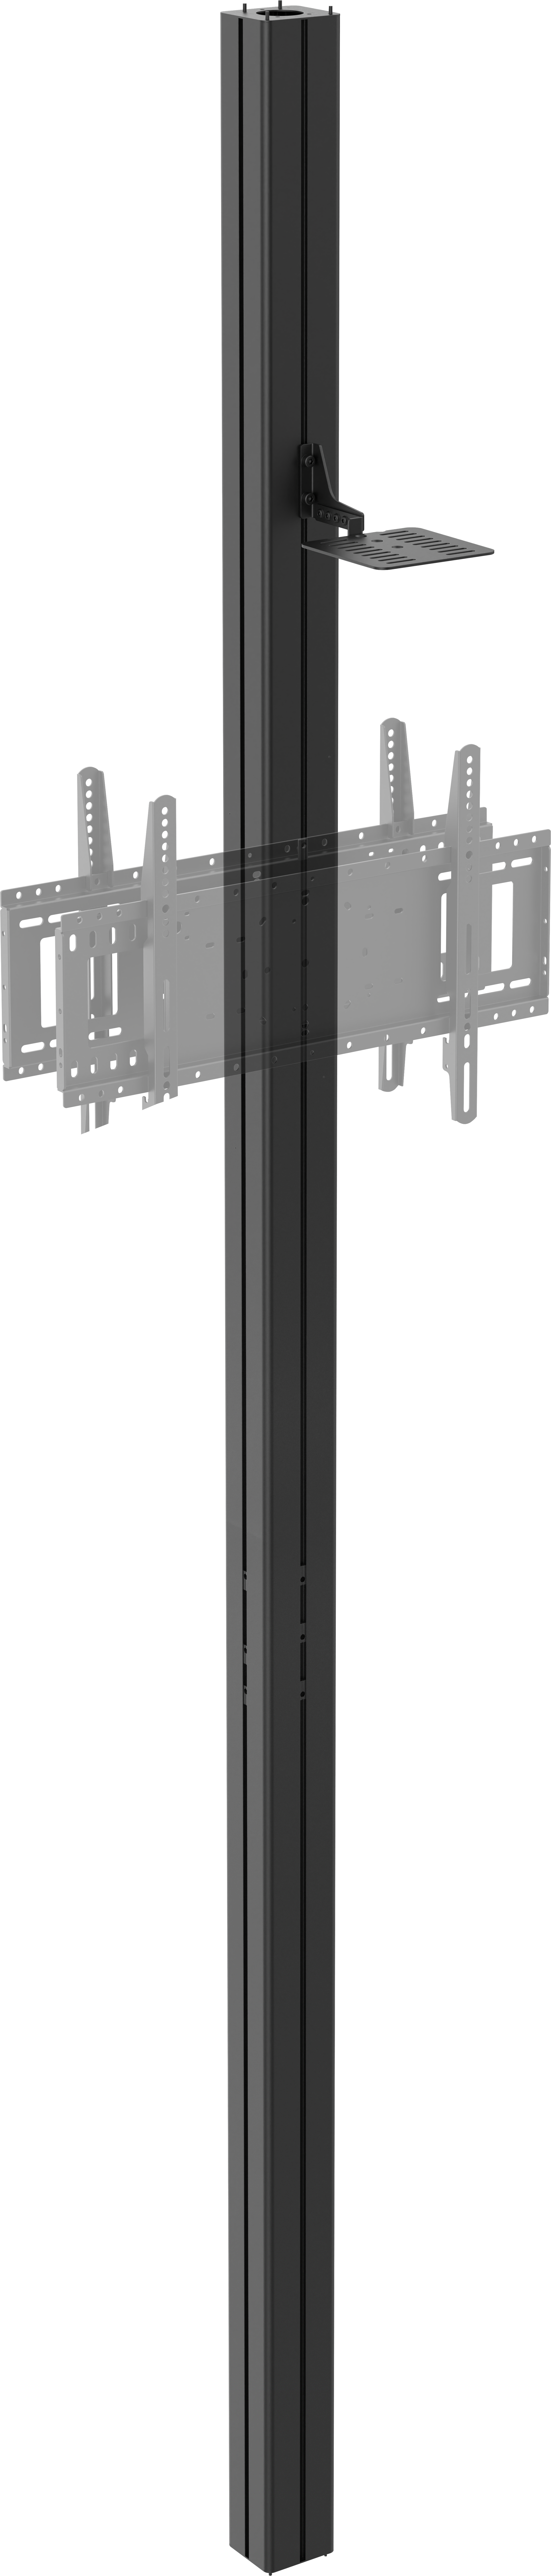 An image showing Floor to Ceiling Display Column